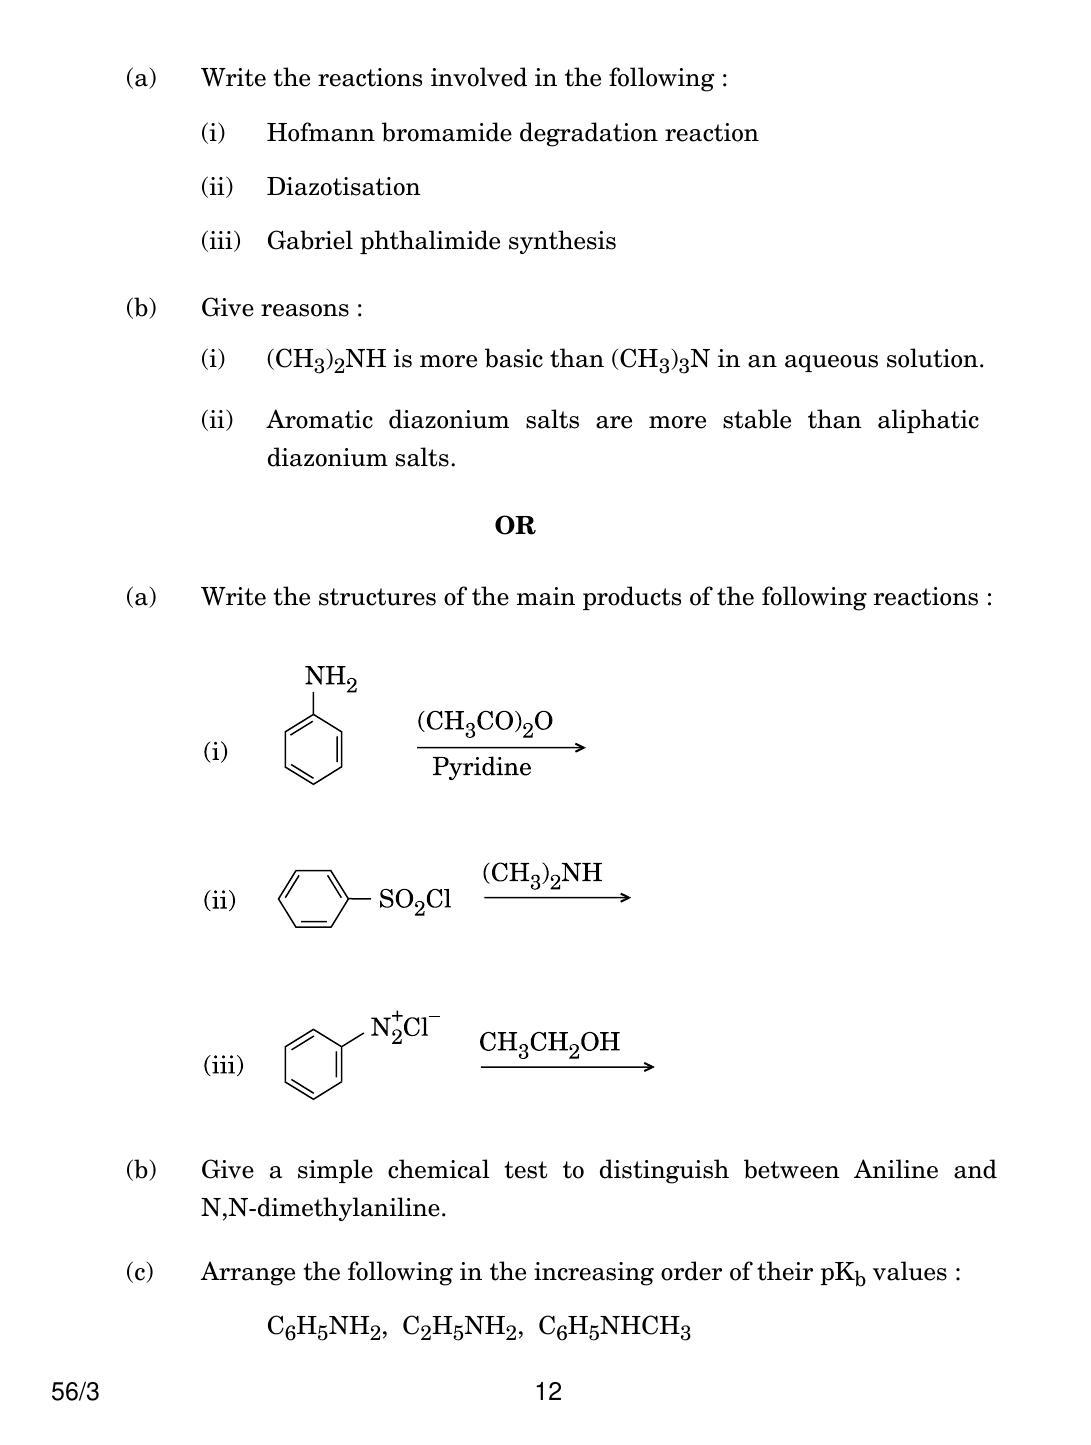 CBSE Class 12 56-3 CHEMISTRY 2018 Question Paper - Page 12